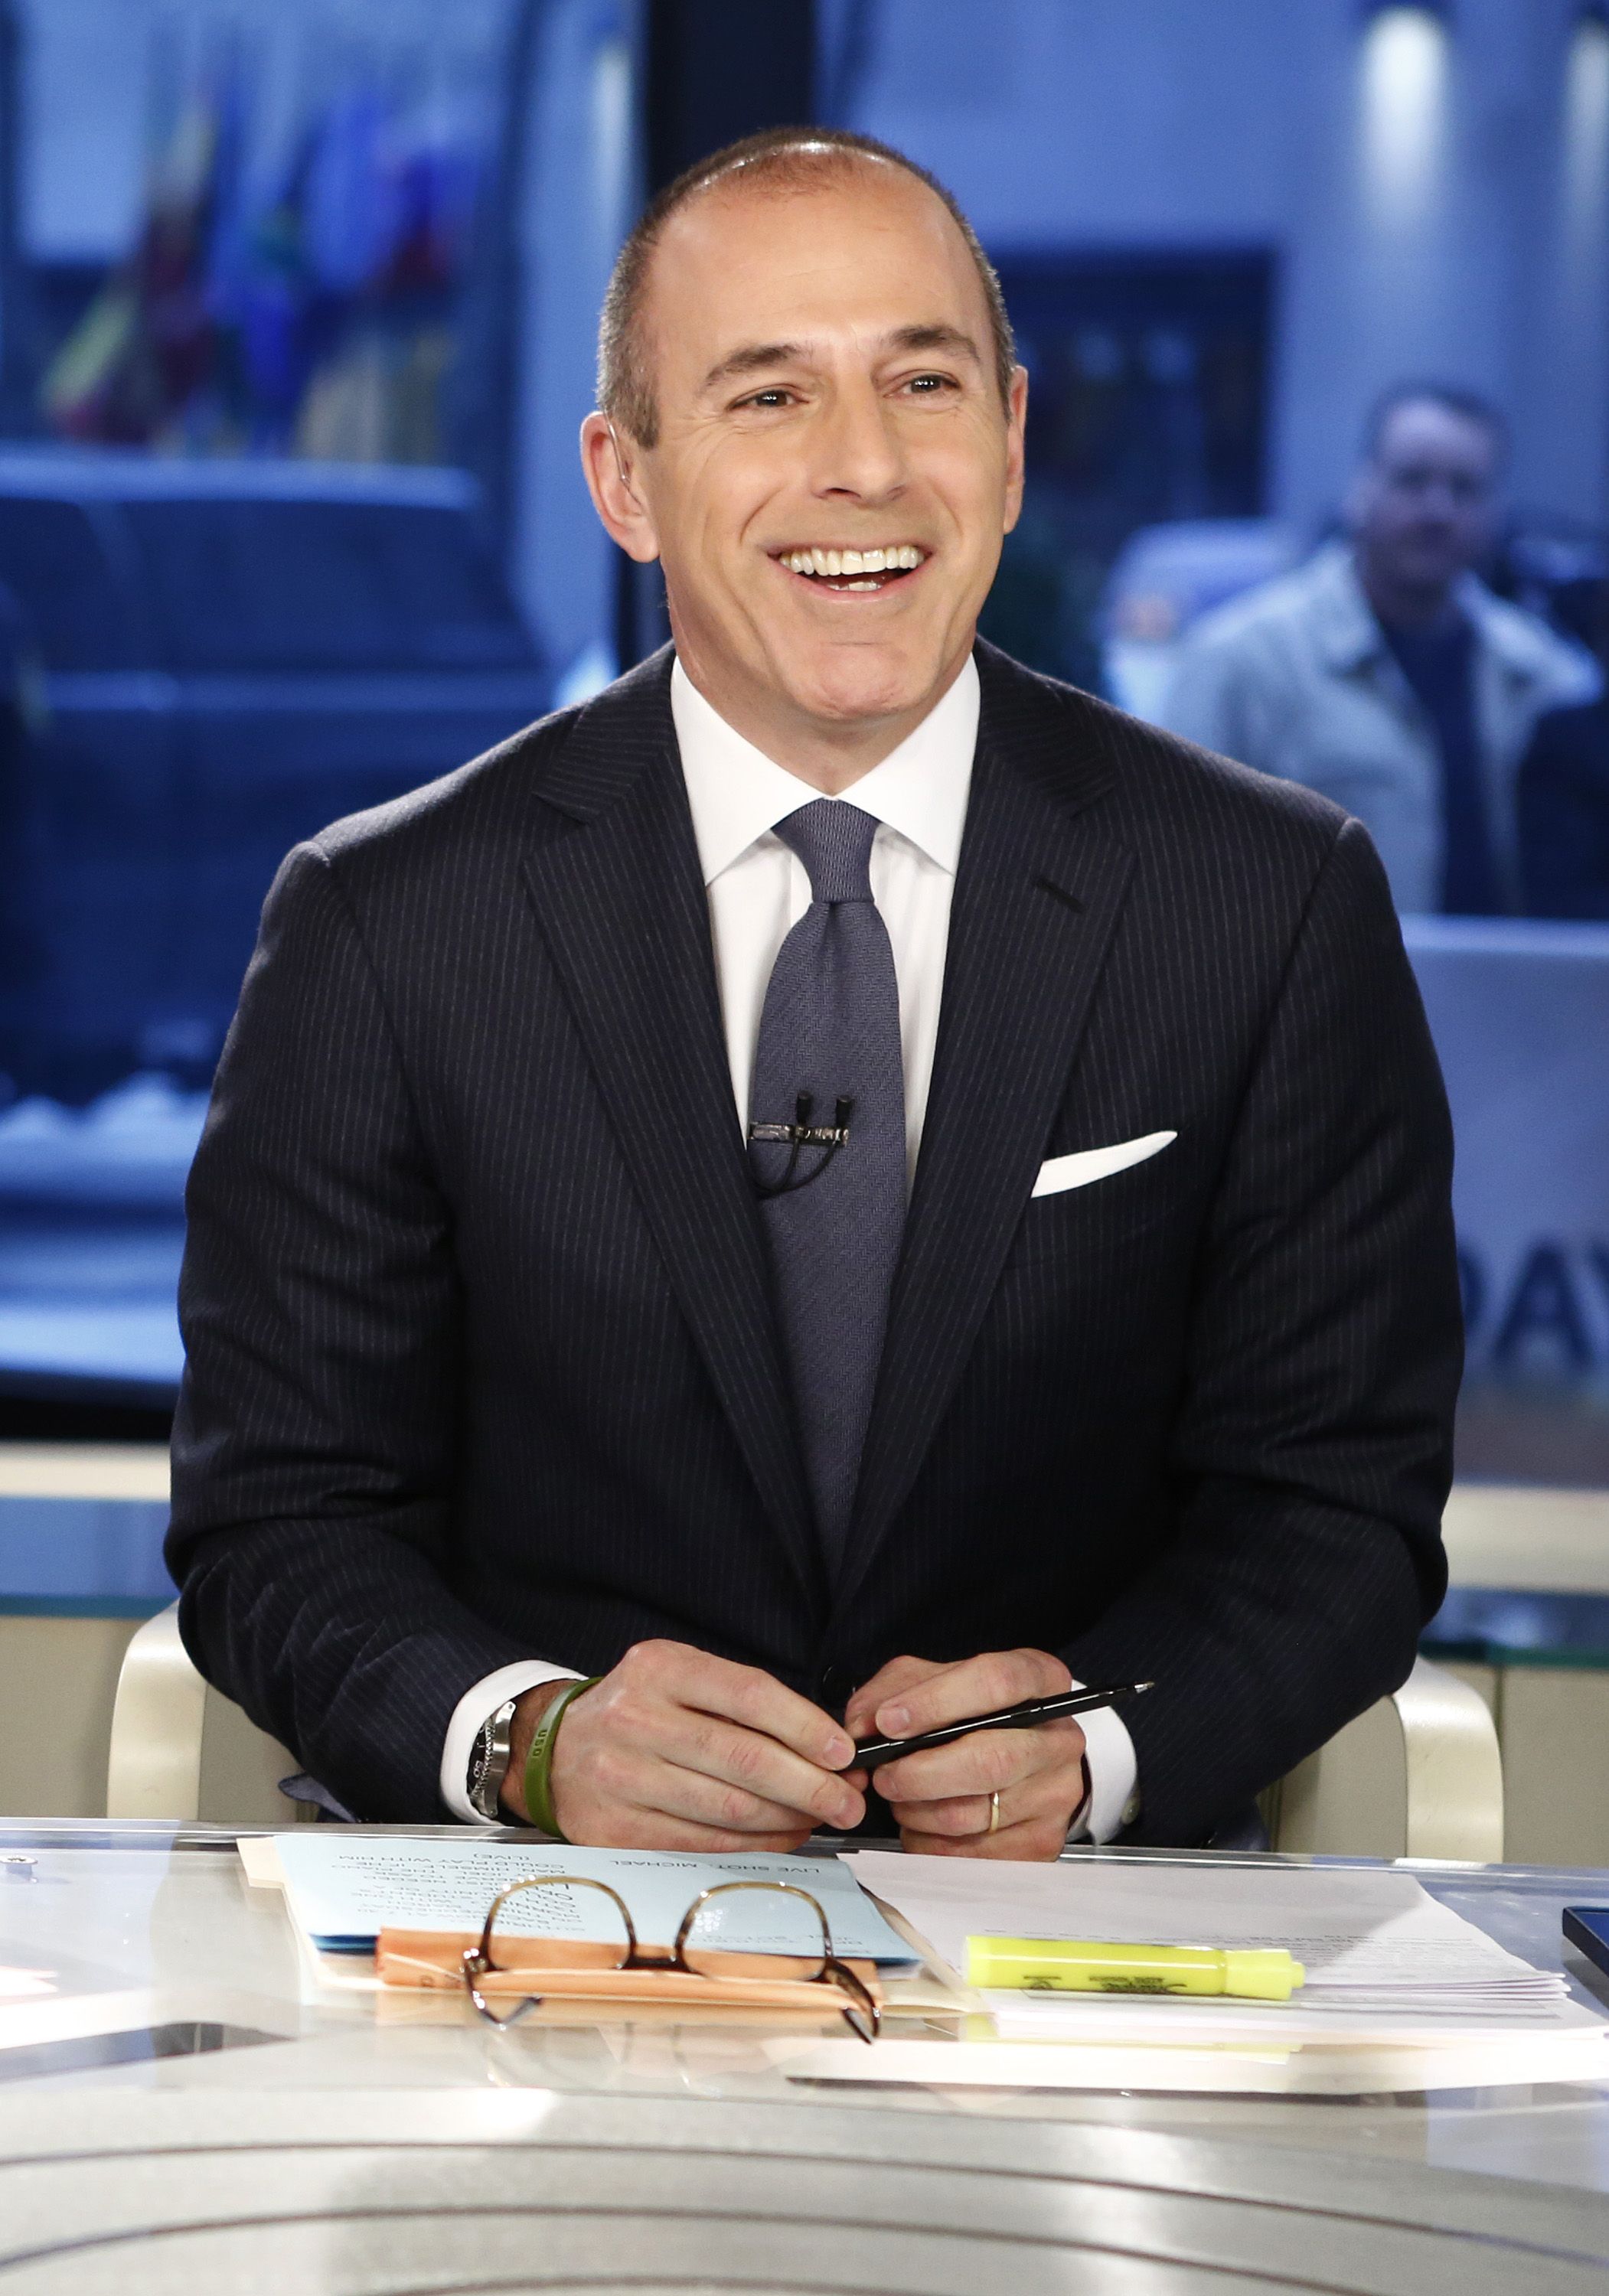 Matt Lauer wore a choker necklace and nothing will ever be the same